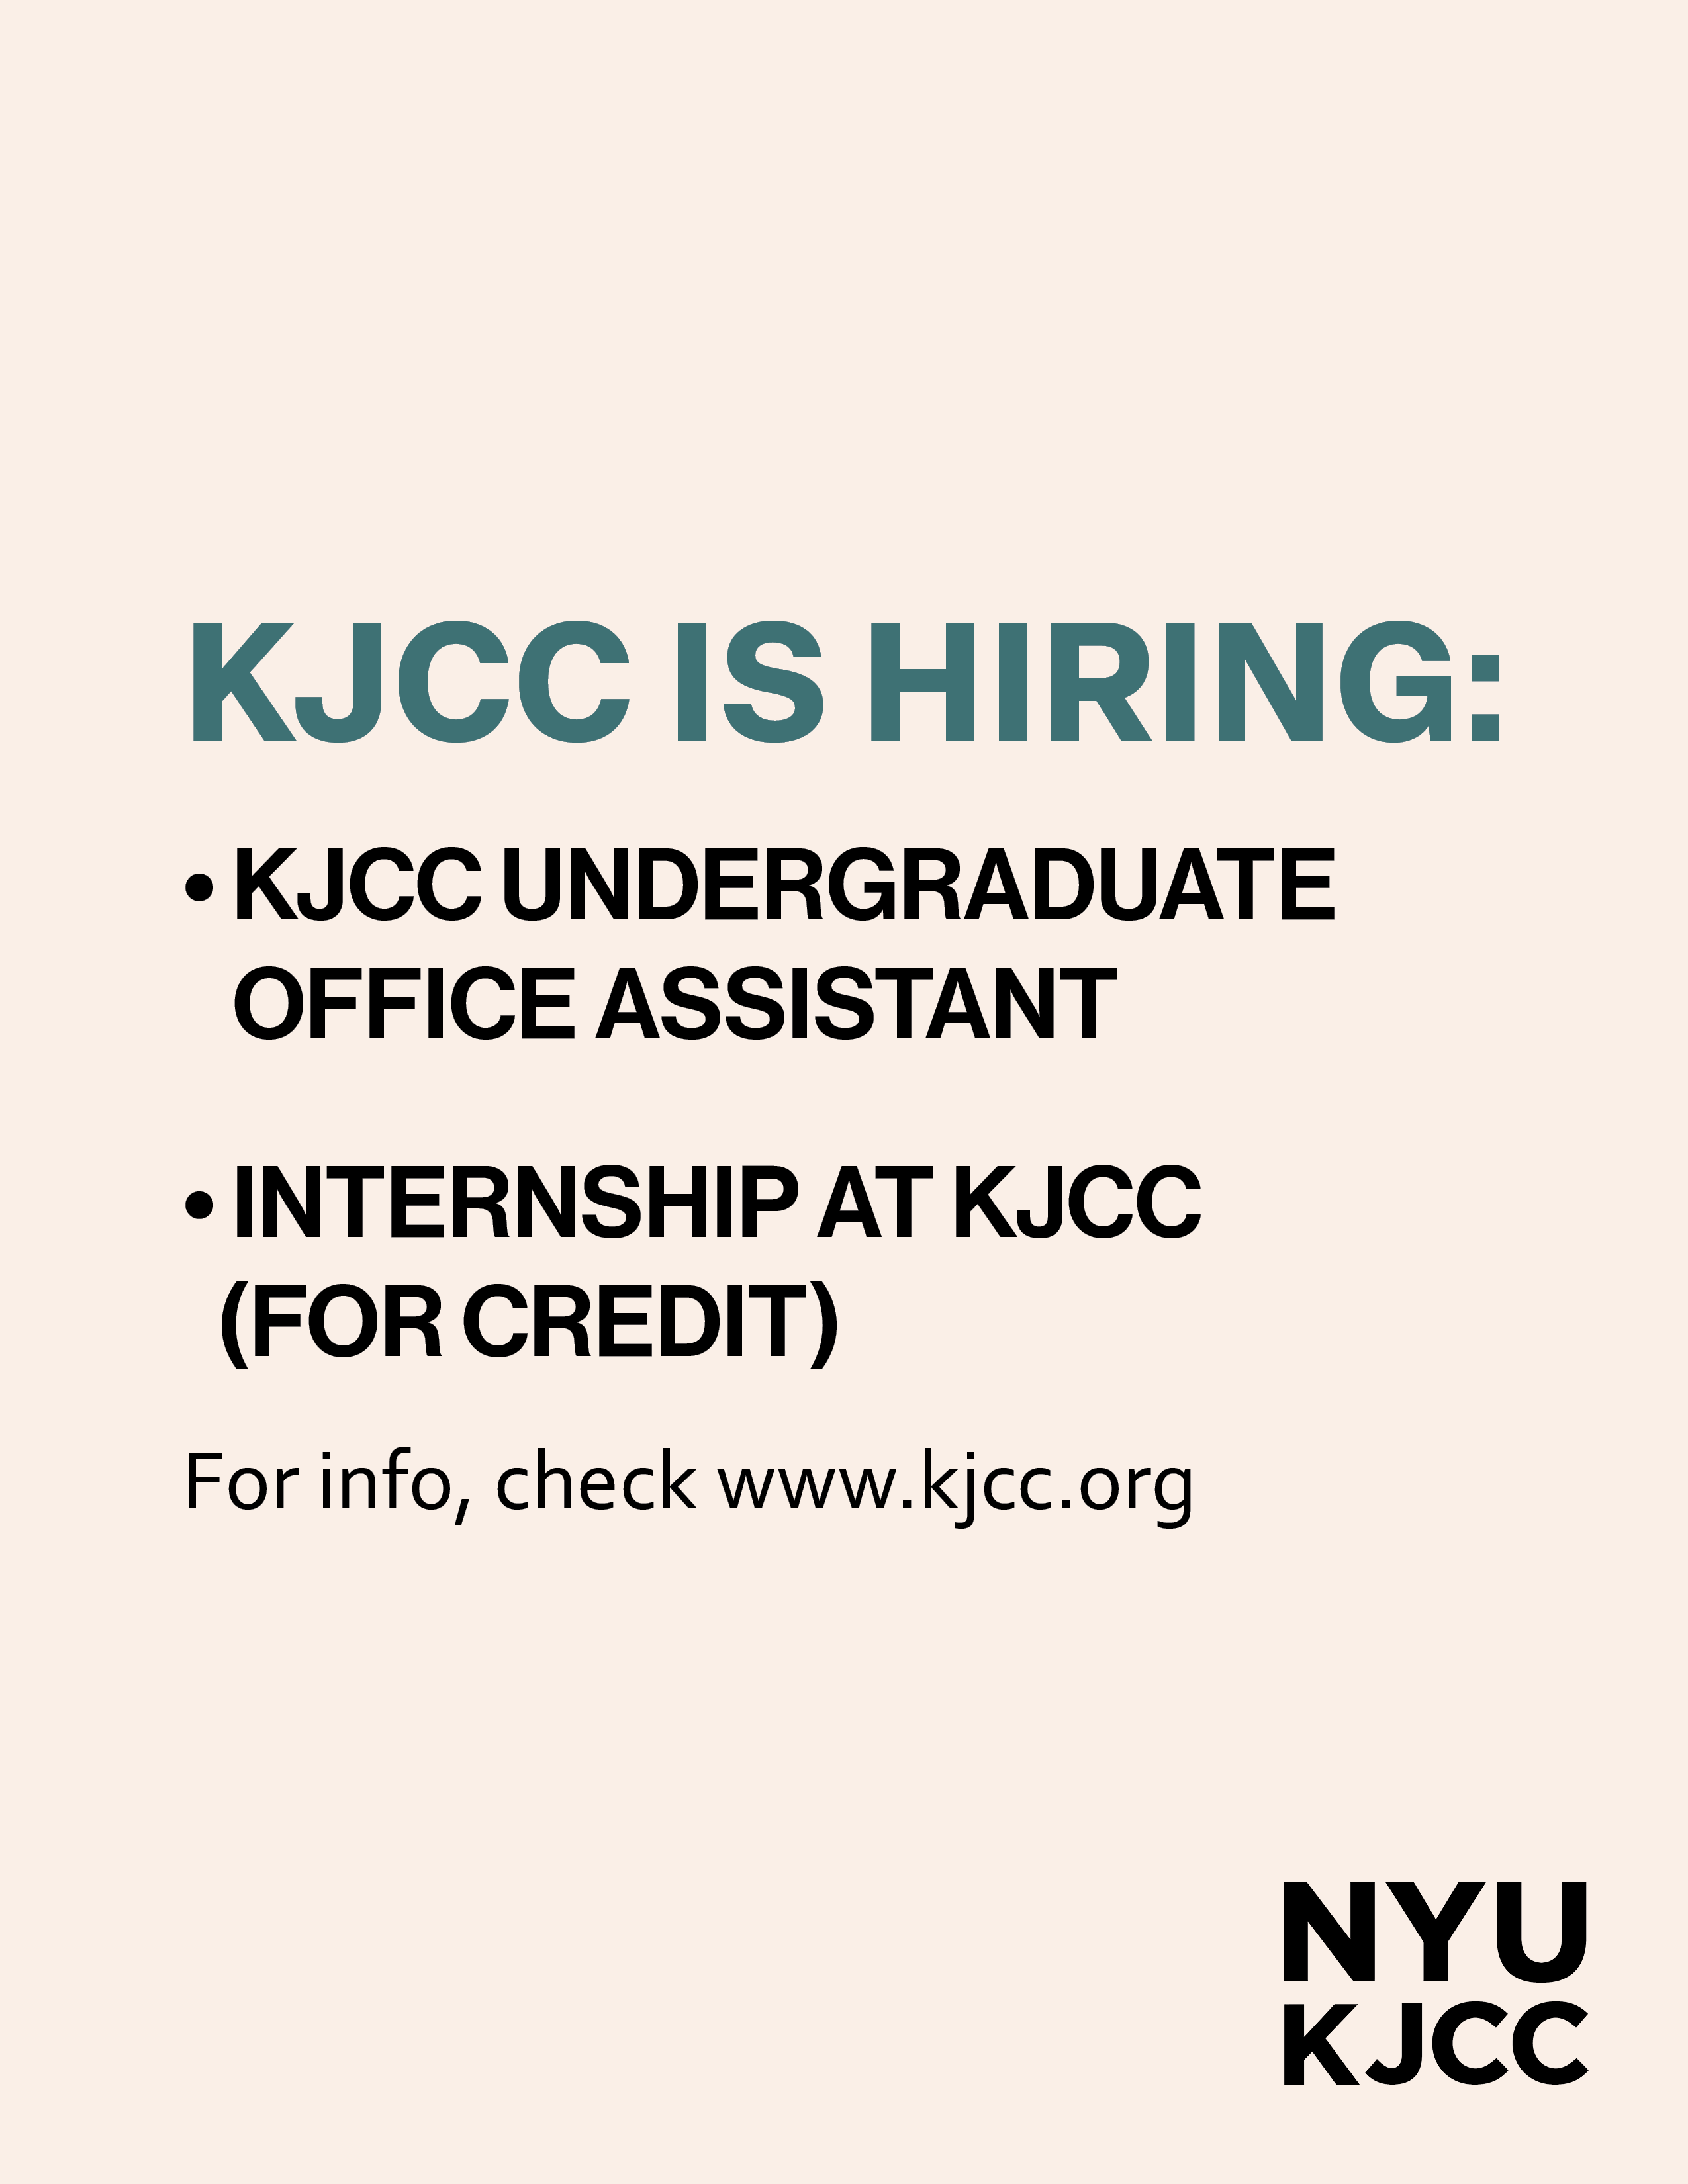 Image from KJCC Is Hiring: Undergrad Intern (for Credits) and Undergrad Office Assistant